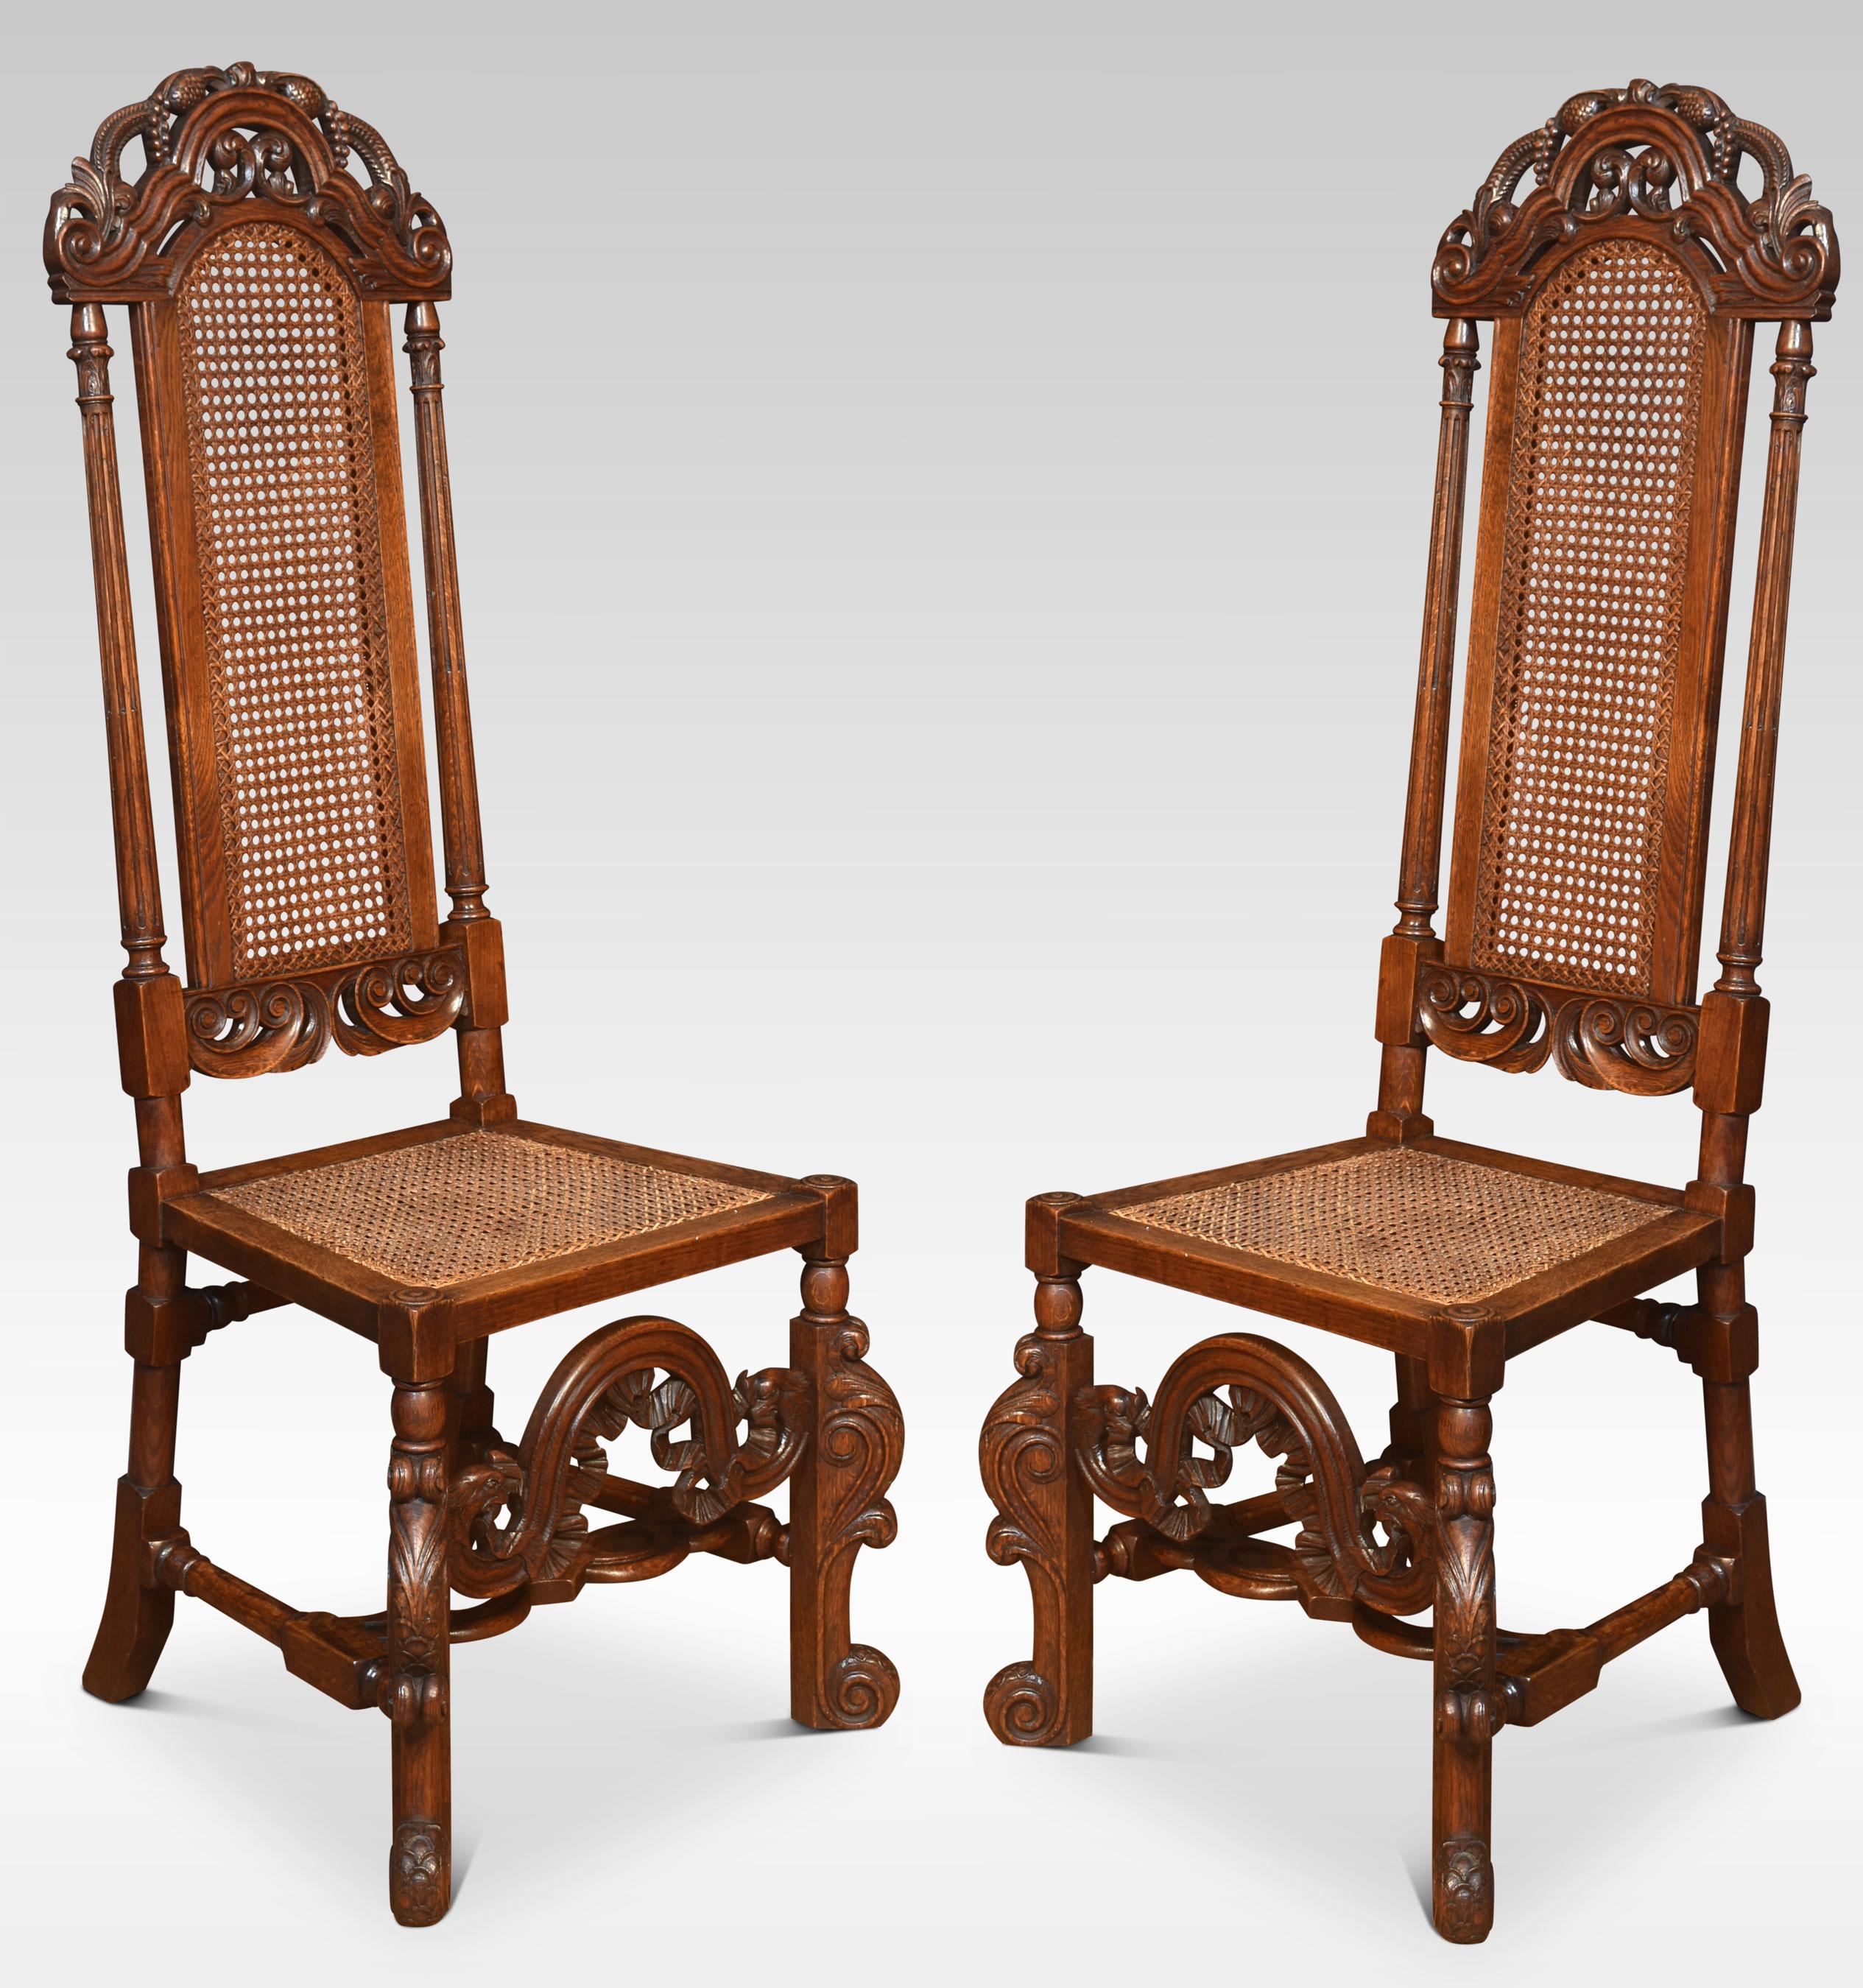 Set of eight oak high back dining chairs, with arched crest rails, cane back and sear all raised up on scroll carved legs united by stretchers.
Dimensions
Height 53.5 Inches height to seat 18 Inches
Width 21.5 Inches
Depth 21 Inches.